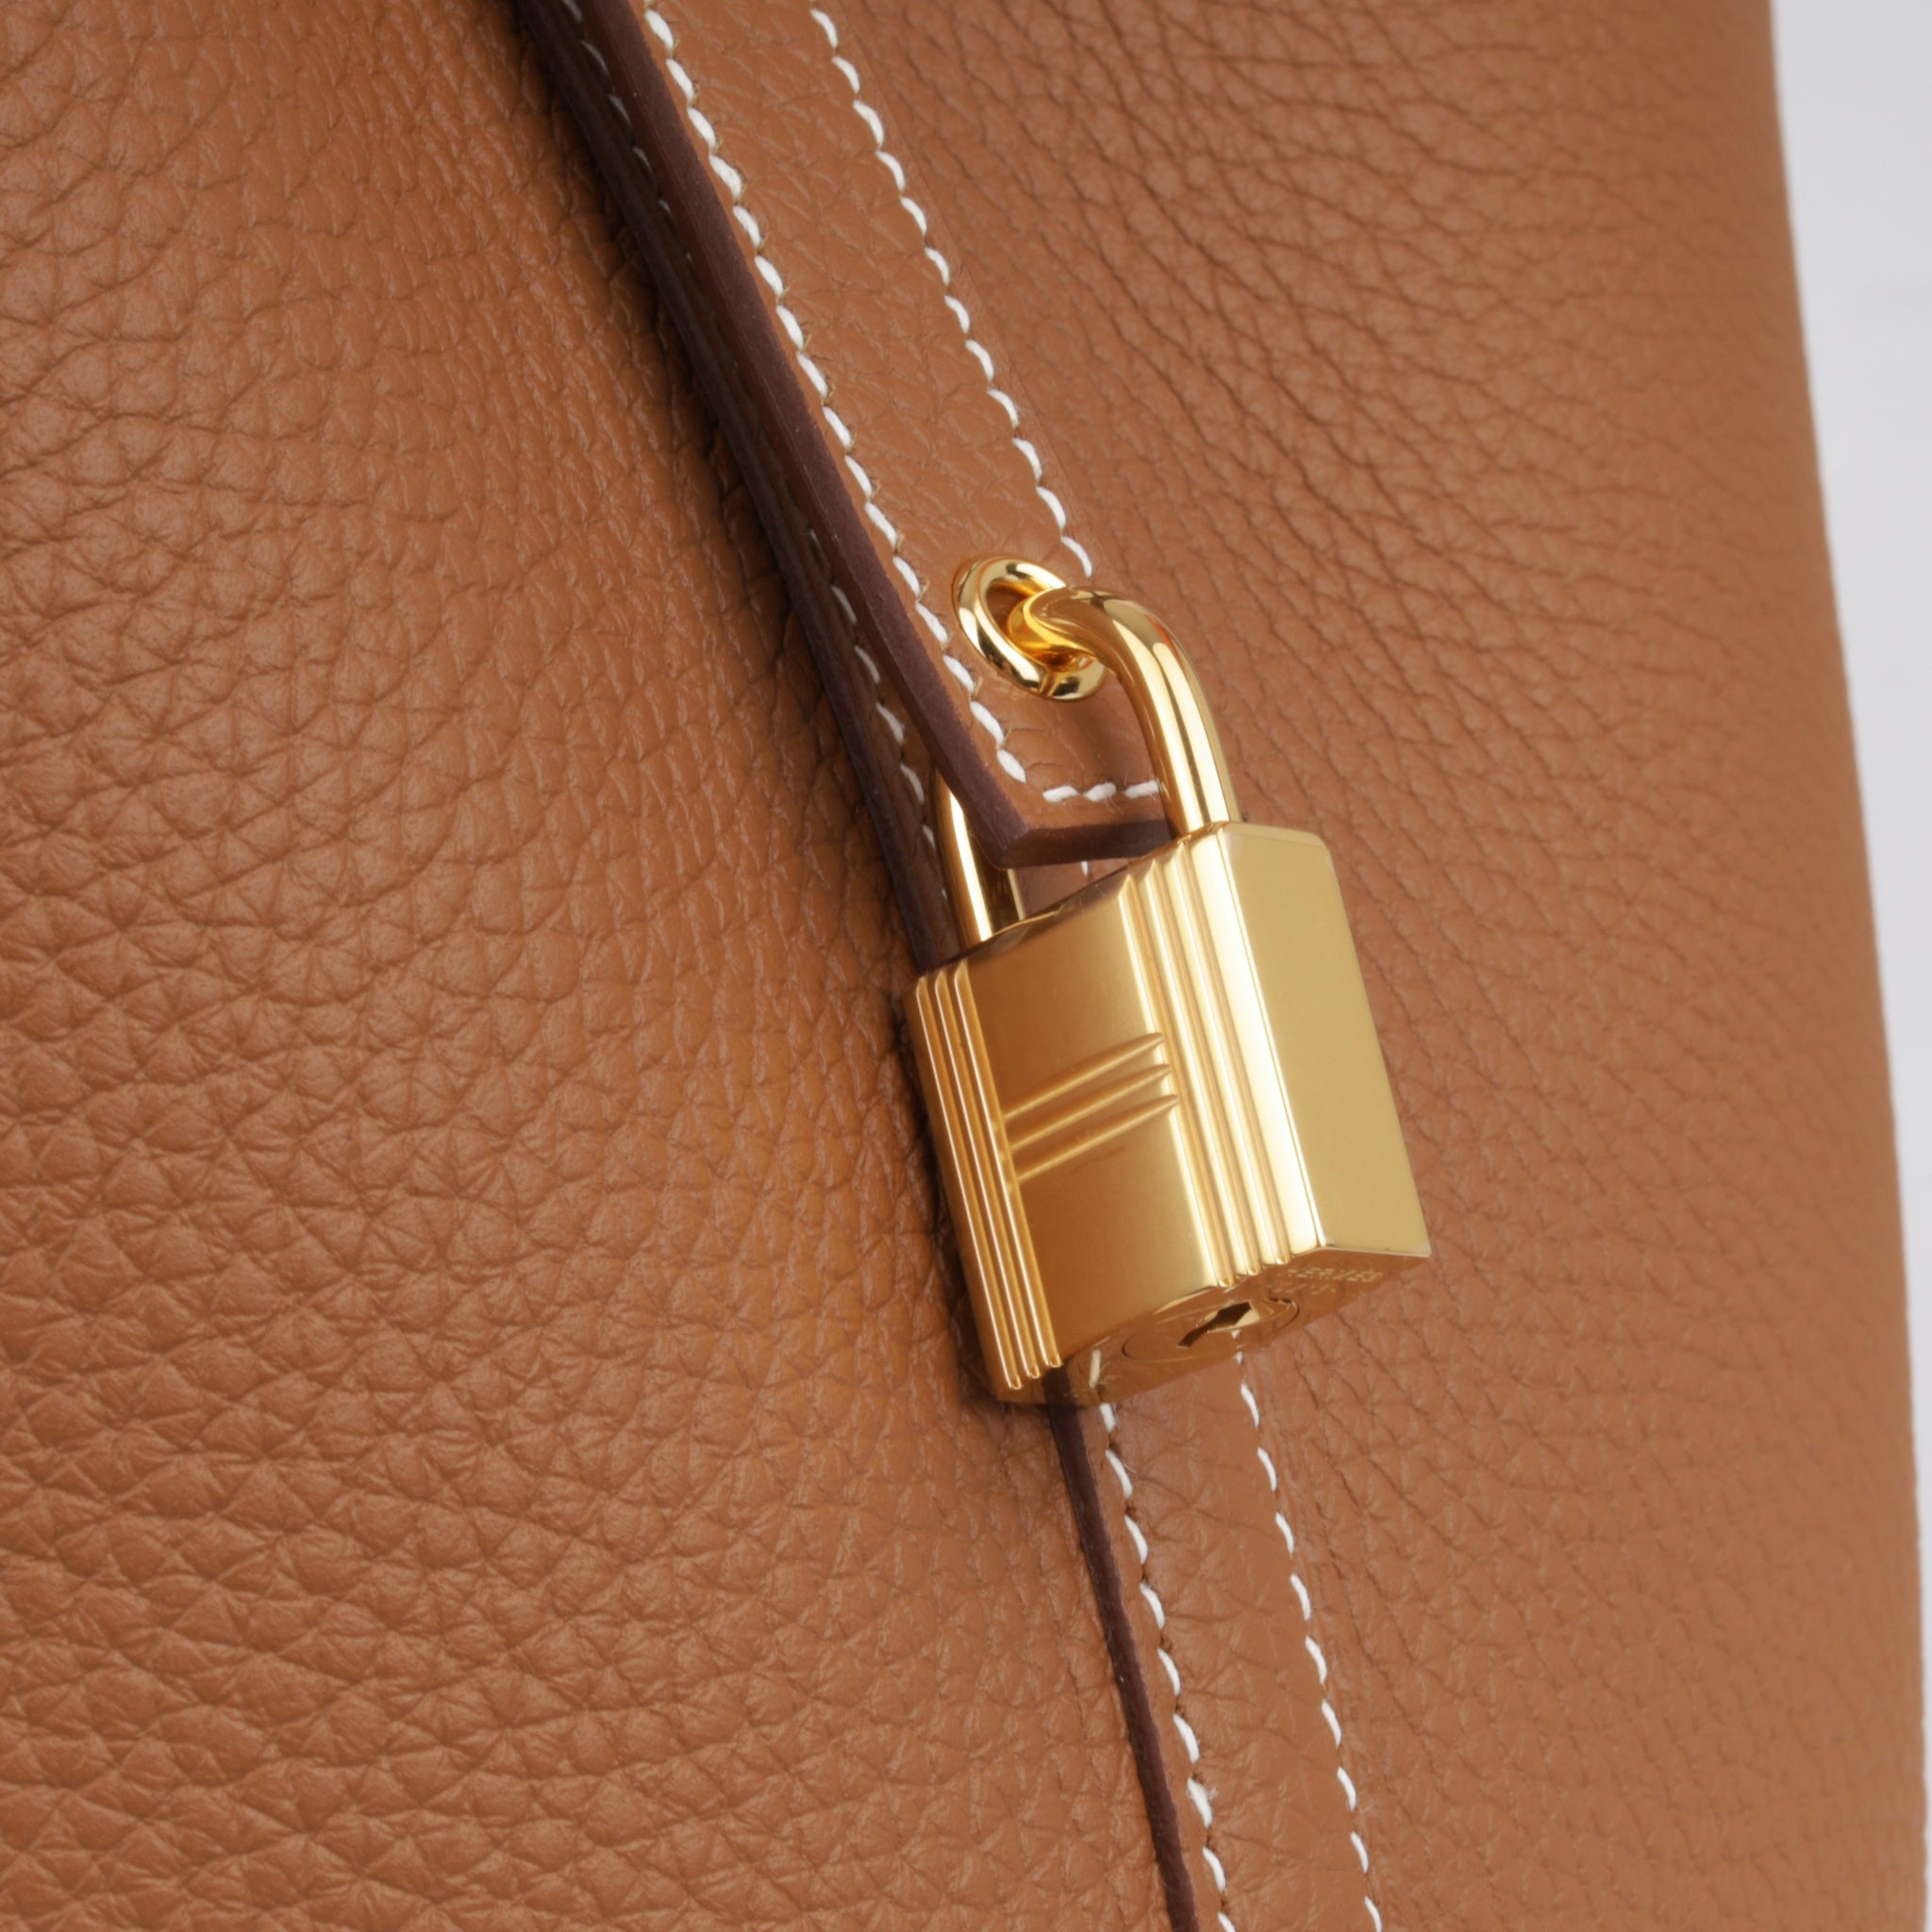 Hermes, Bags, Gold Herms Clemence Picotin Lock 8 Brand New